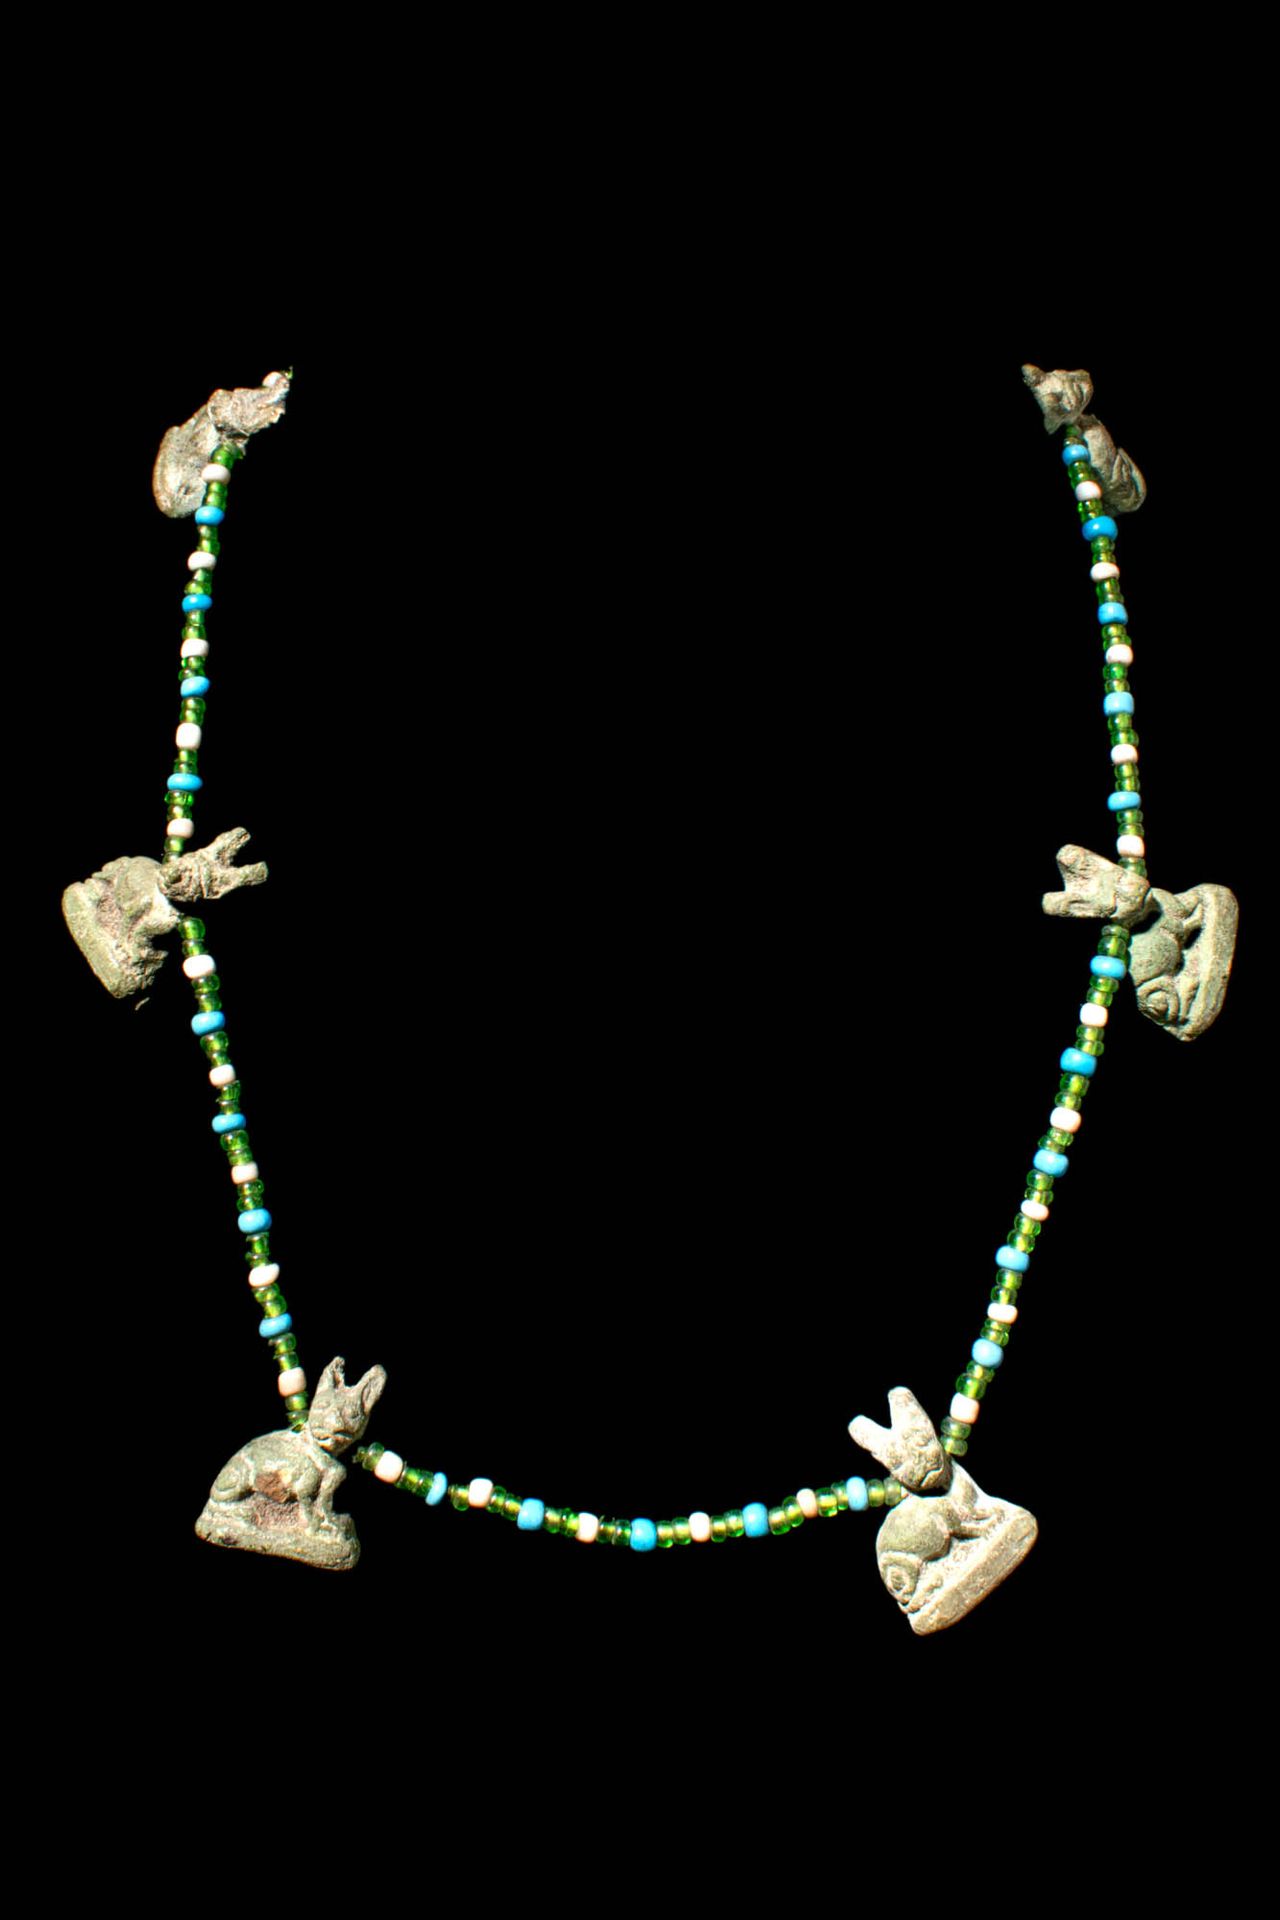 ROMANO-EGYPTIAN NECKLACE WITH CAT AMULETS 托勒密至罗马时期，约公元前 100 年至公元 100 年。公元前 100 年&hellip;